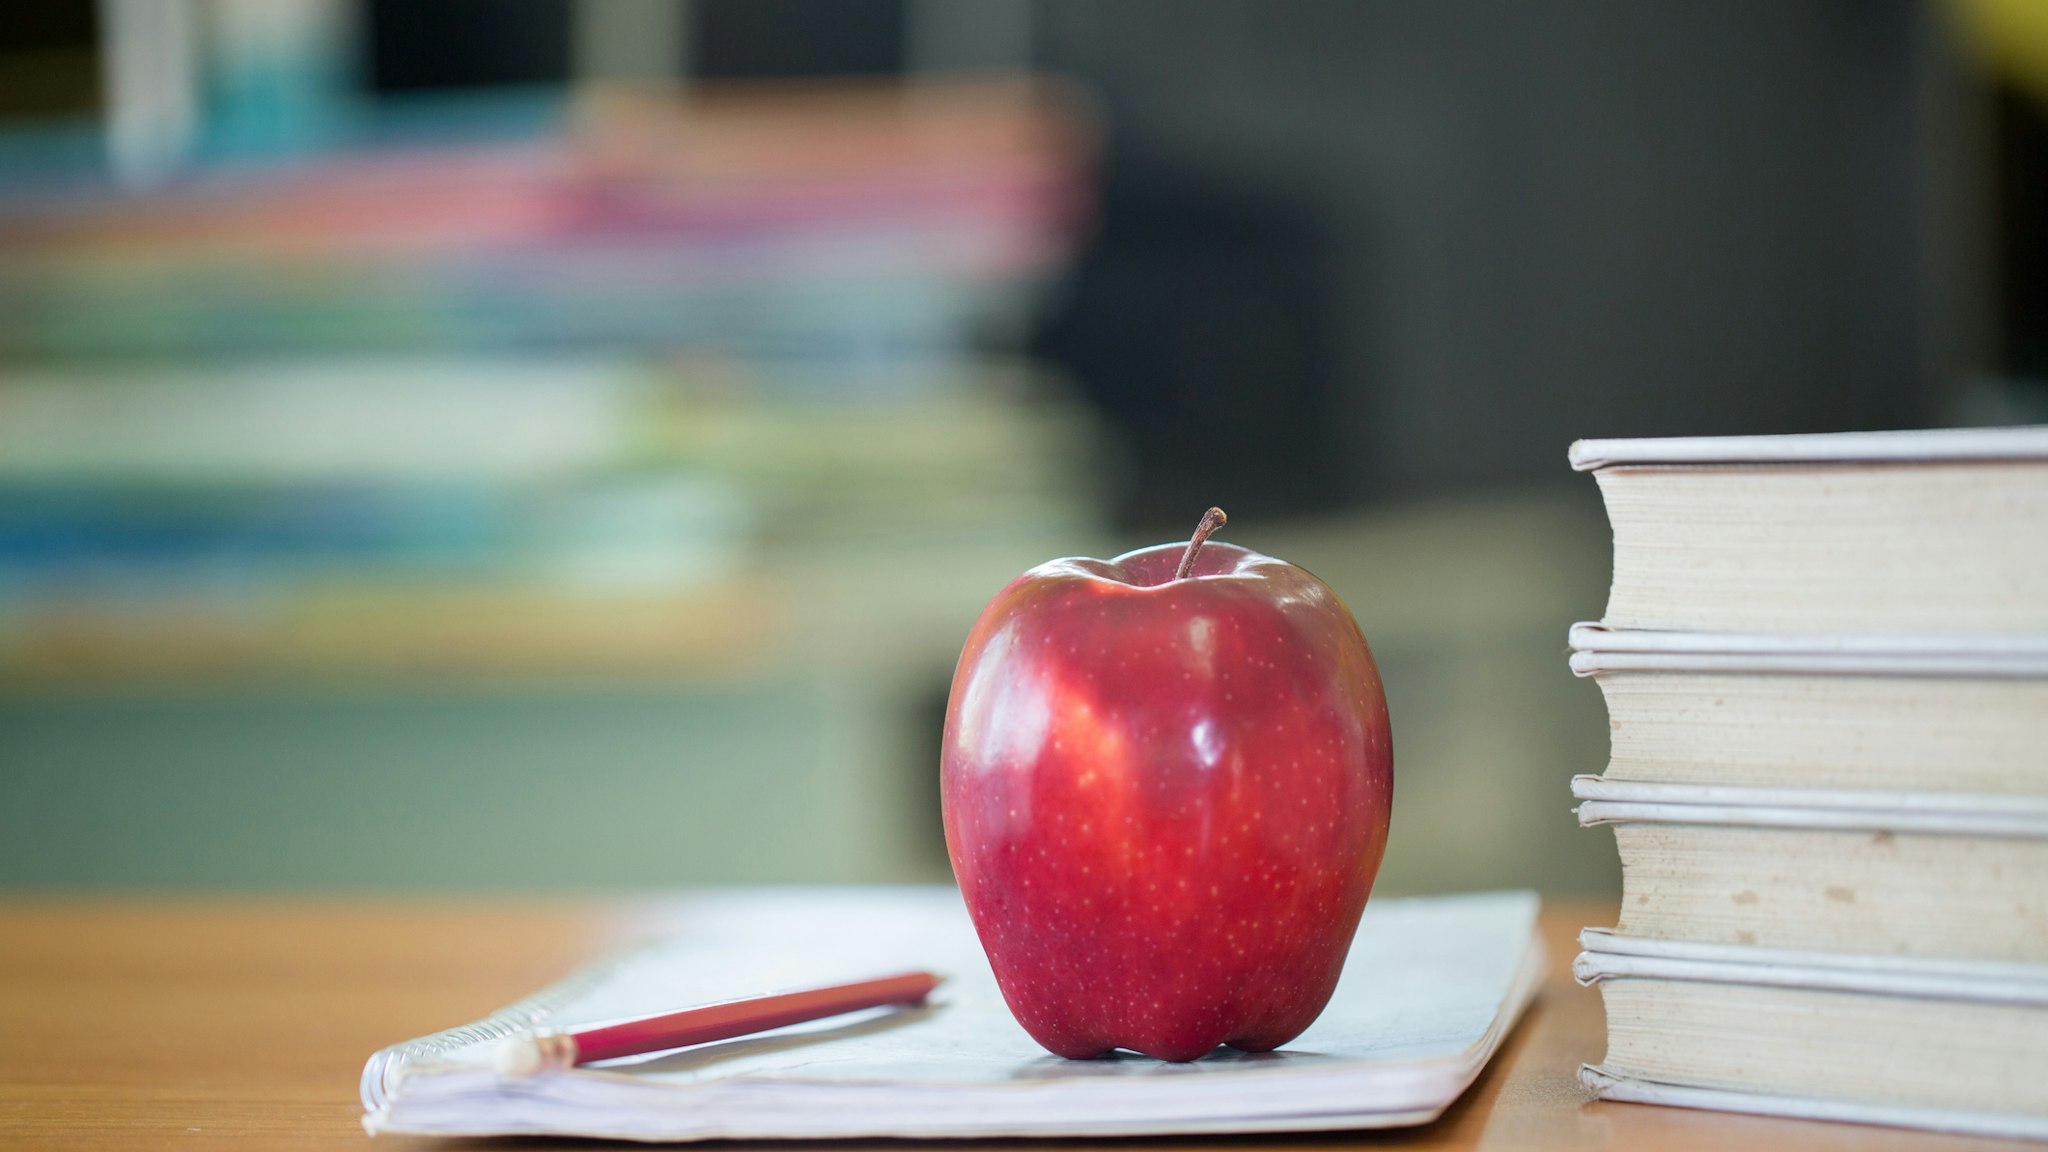 School teacher's desk with stack of books and apple, Educational concept. - stock photo